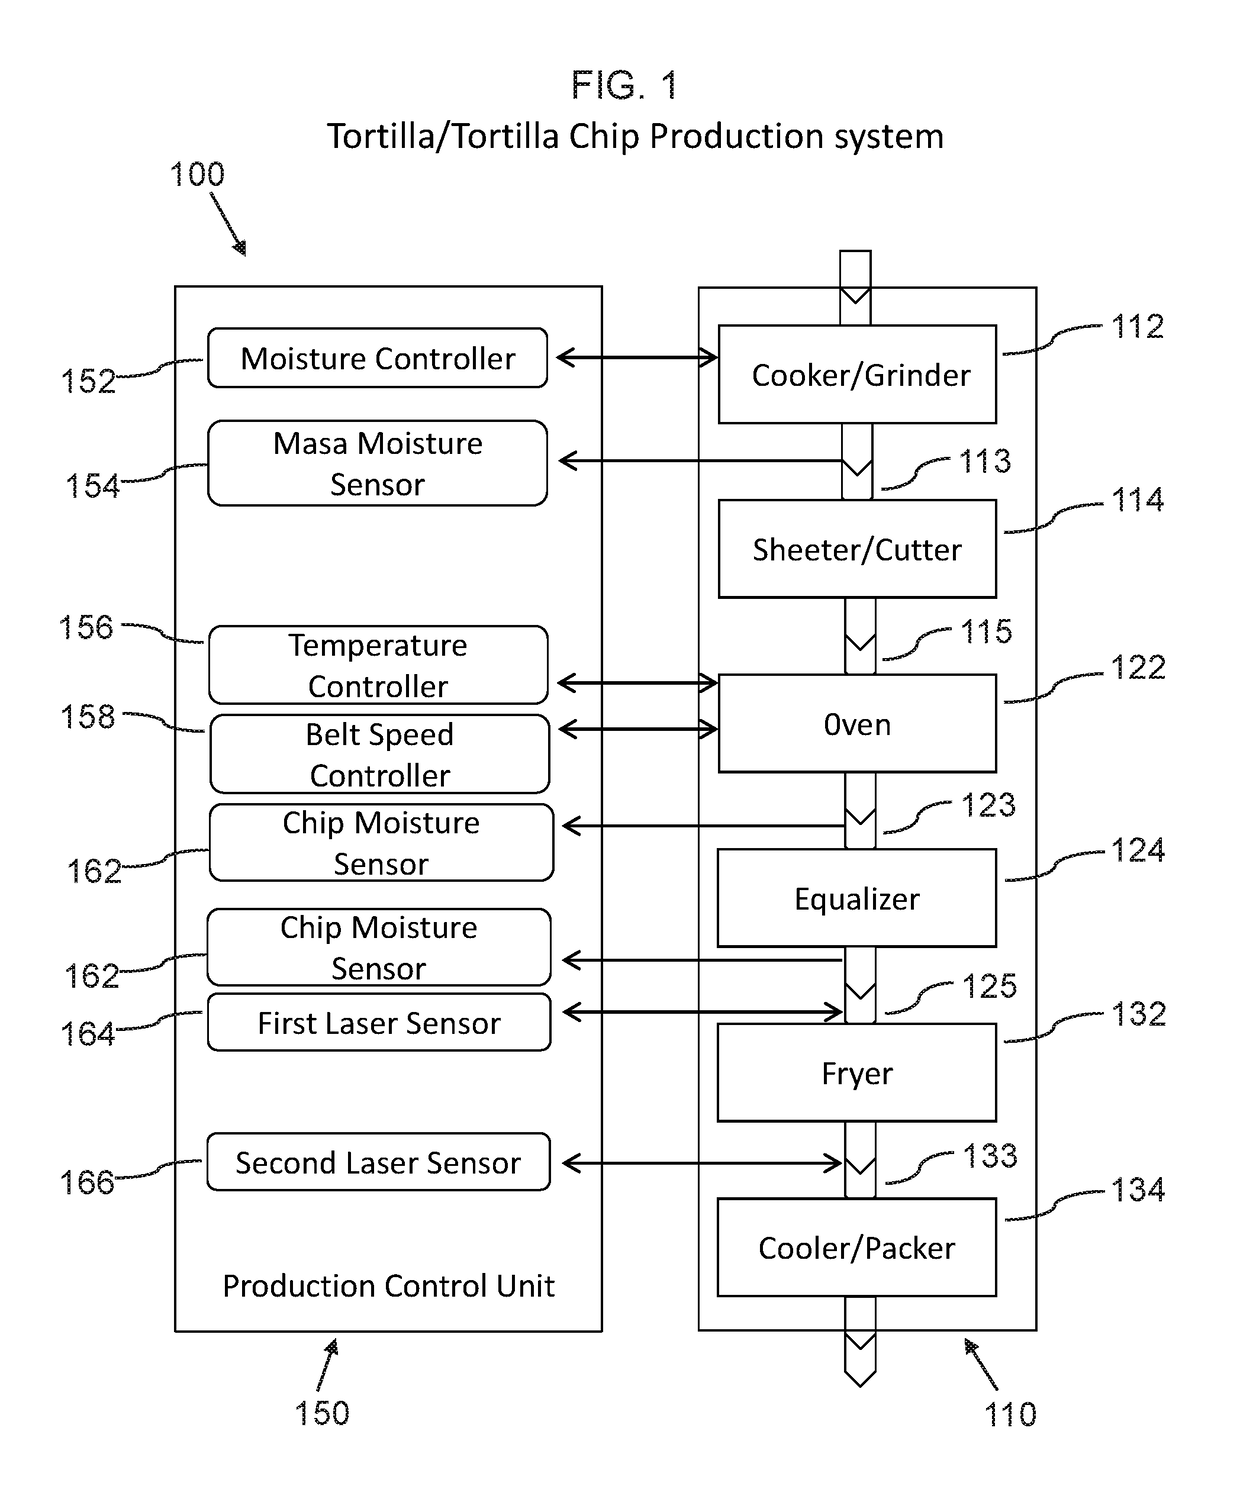 System, device, and method for moisture and texture detection and control in tortilla chip production